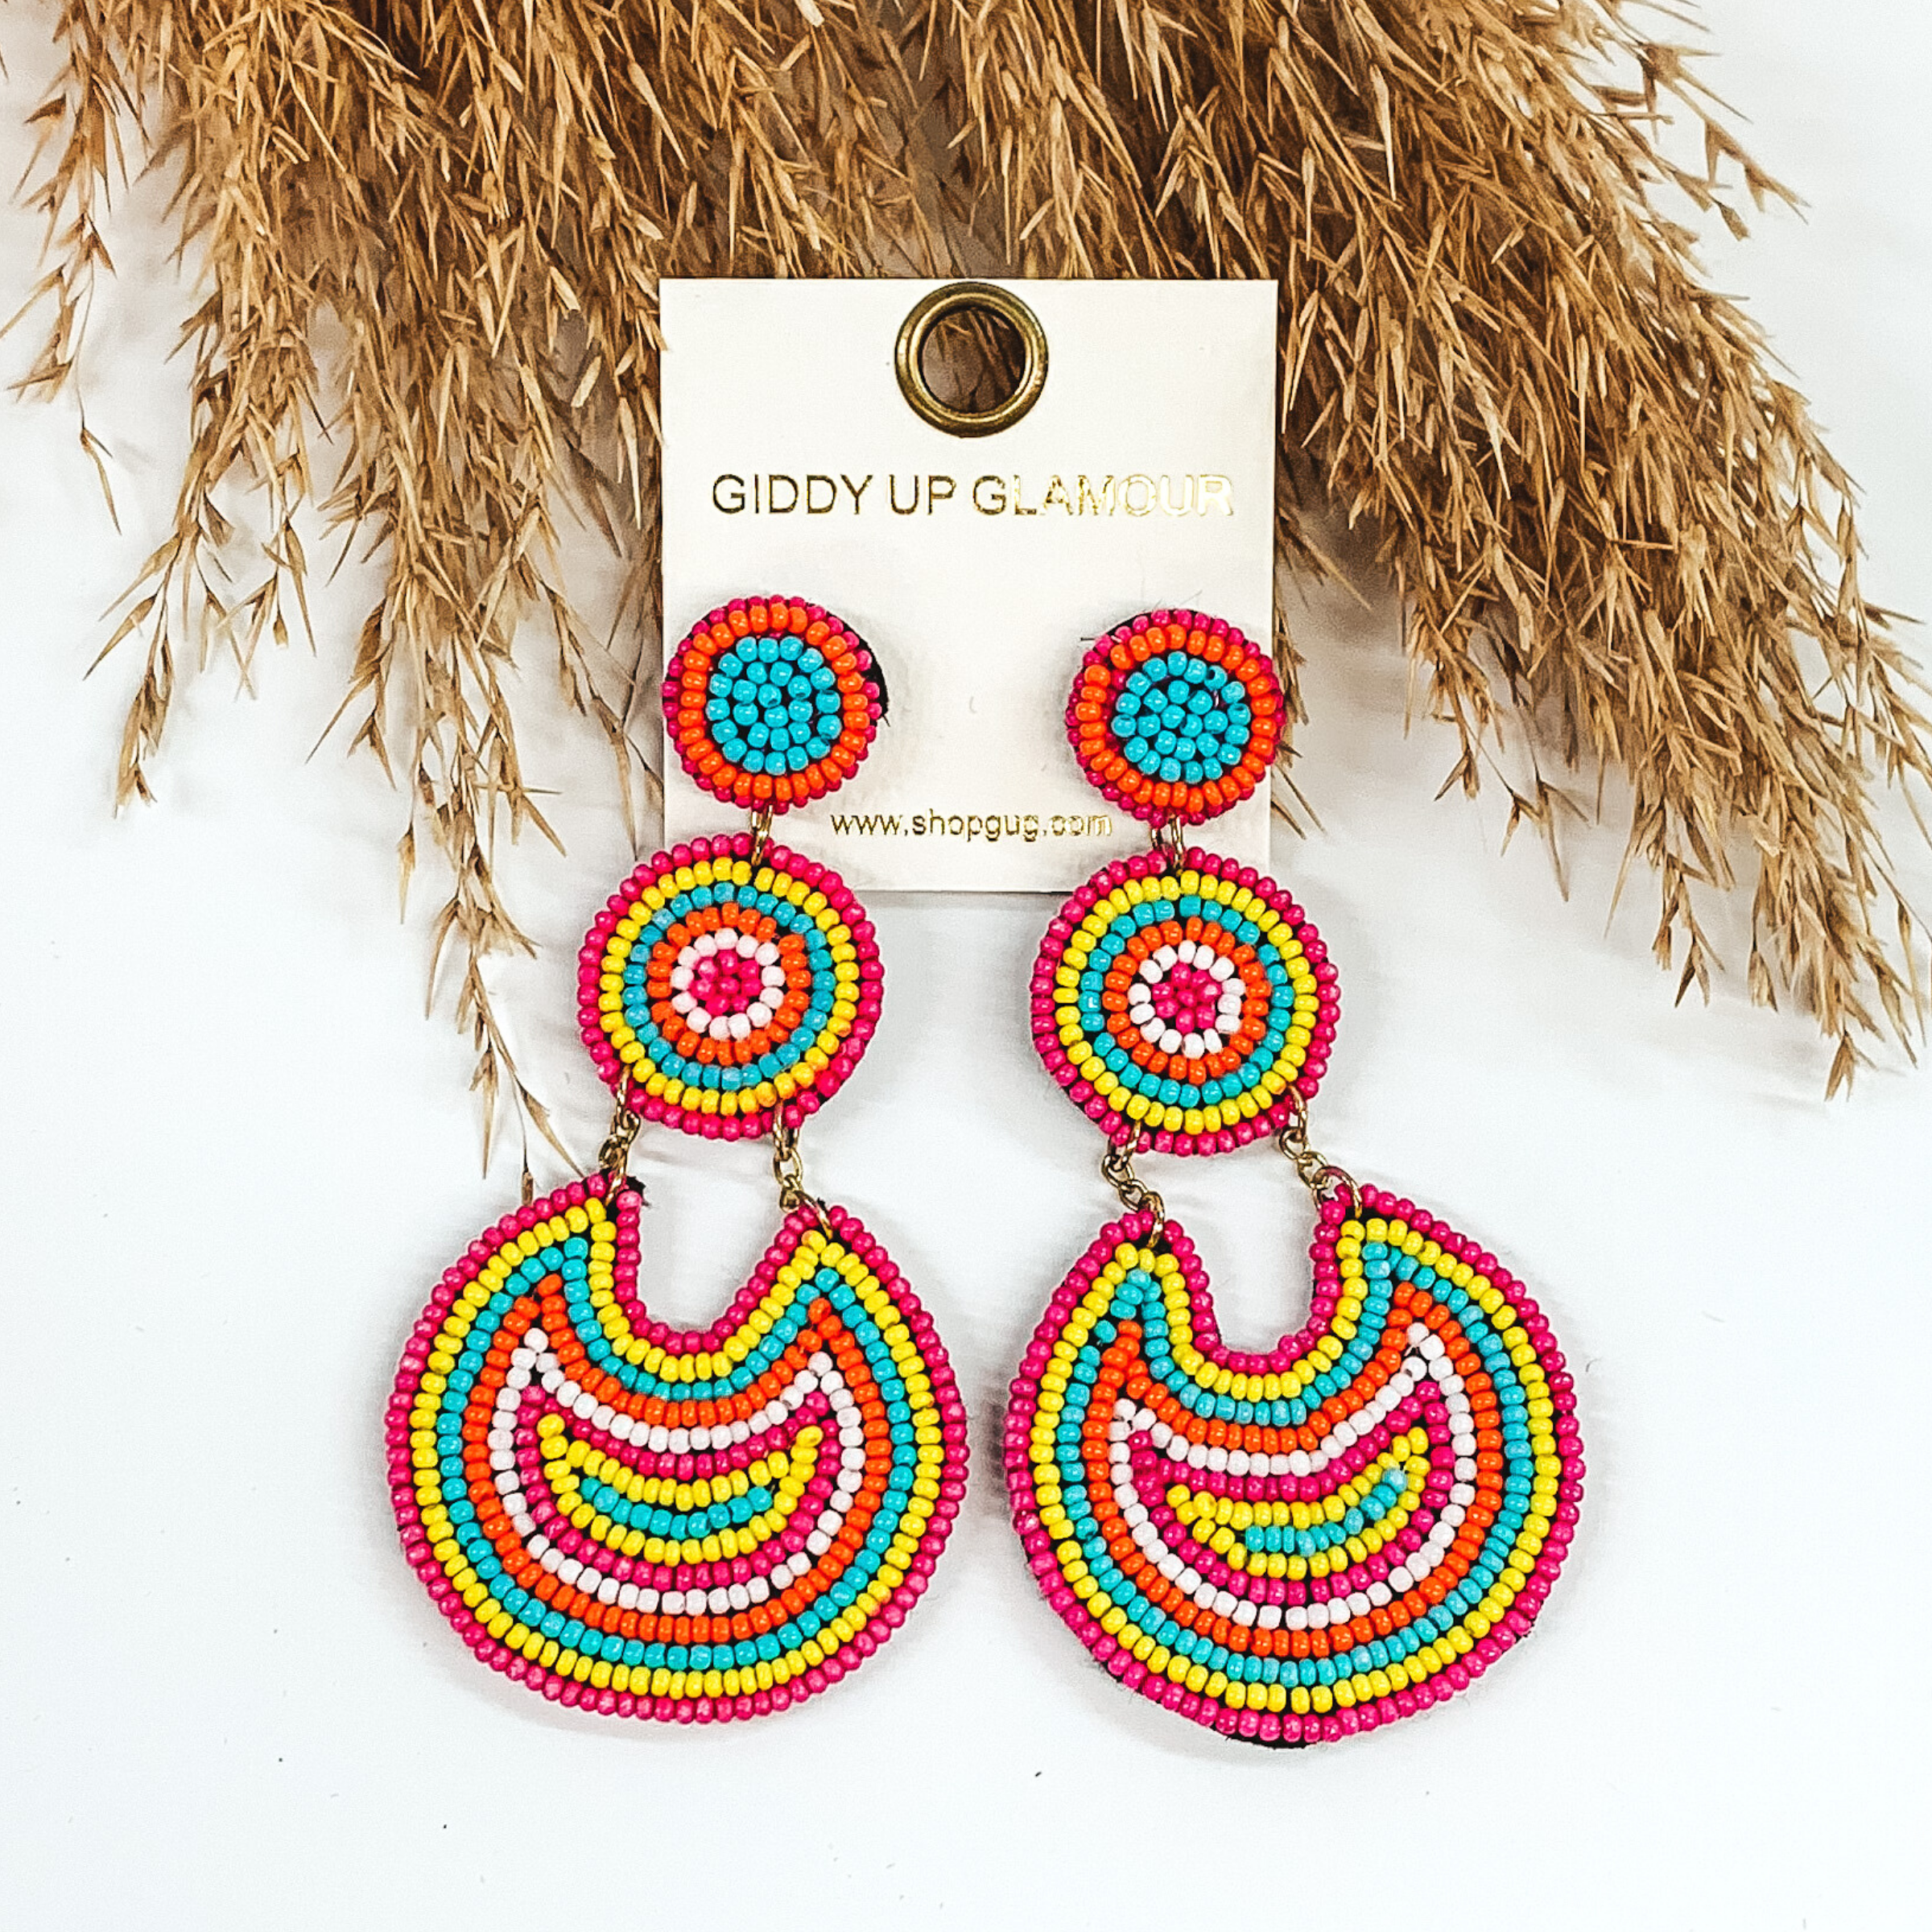 Pure Perfection Seed Bead 3 Tiered Drop Earrings in Multicolored - Giddy Up Glamour Boutique